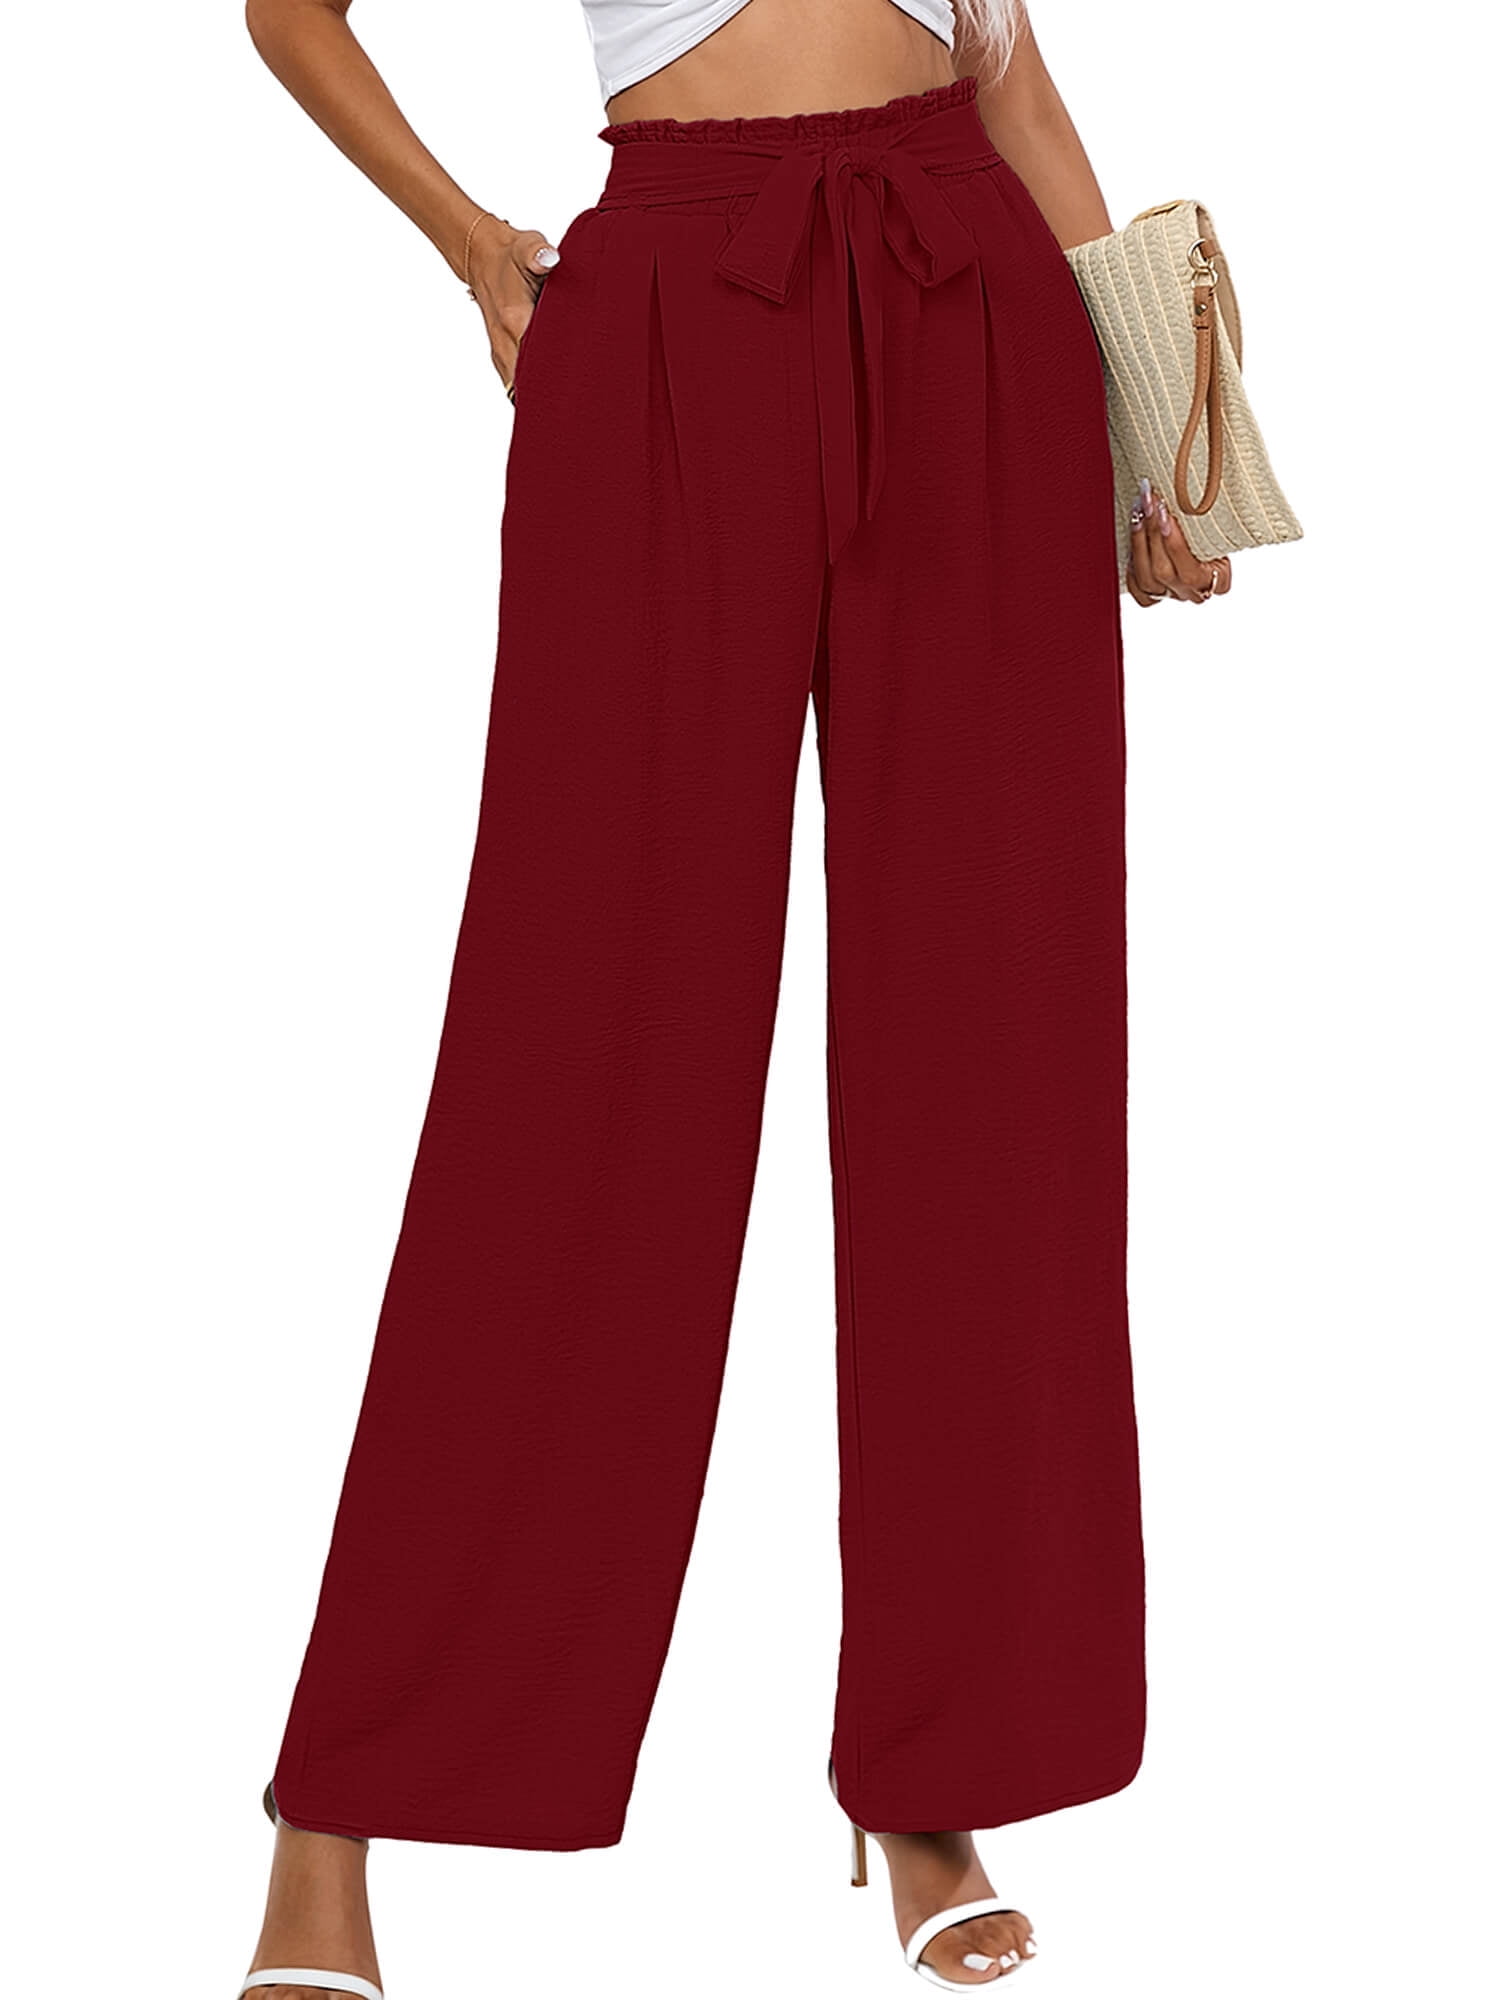 Chiclily Women's Wide Leg Pants with Pockets Lightweight High Waisted  Adjustable Tie Knot Loose Trousers Flowy Summer Beach Lounge Pants, US Size  2XL in Burgundy 